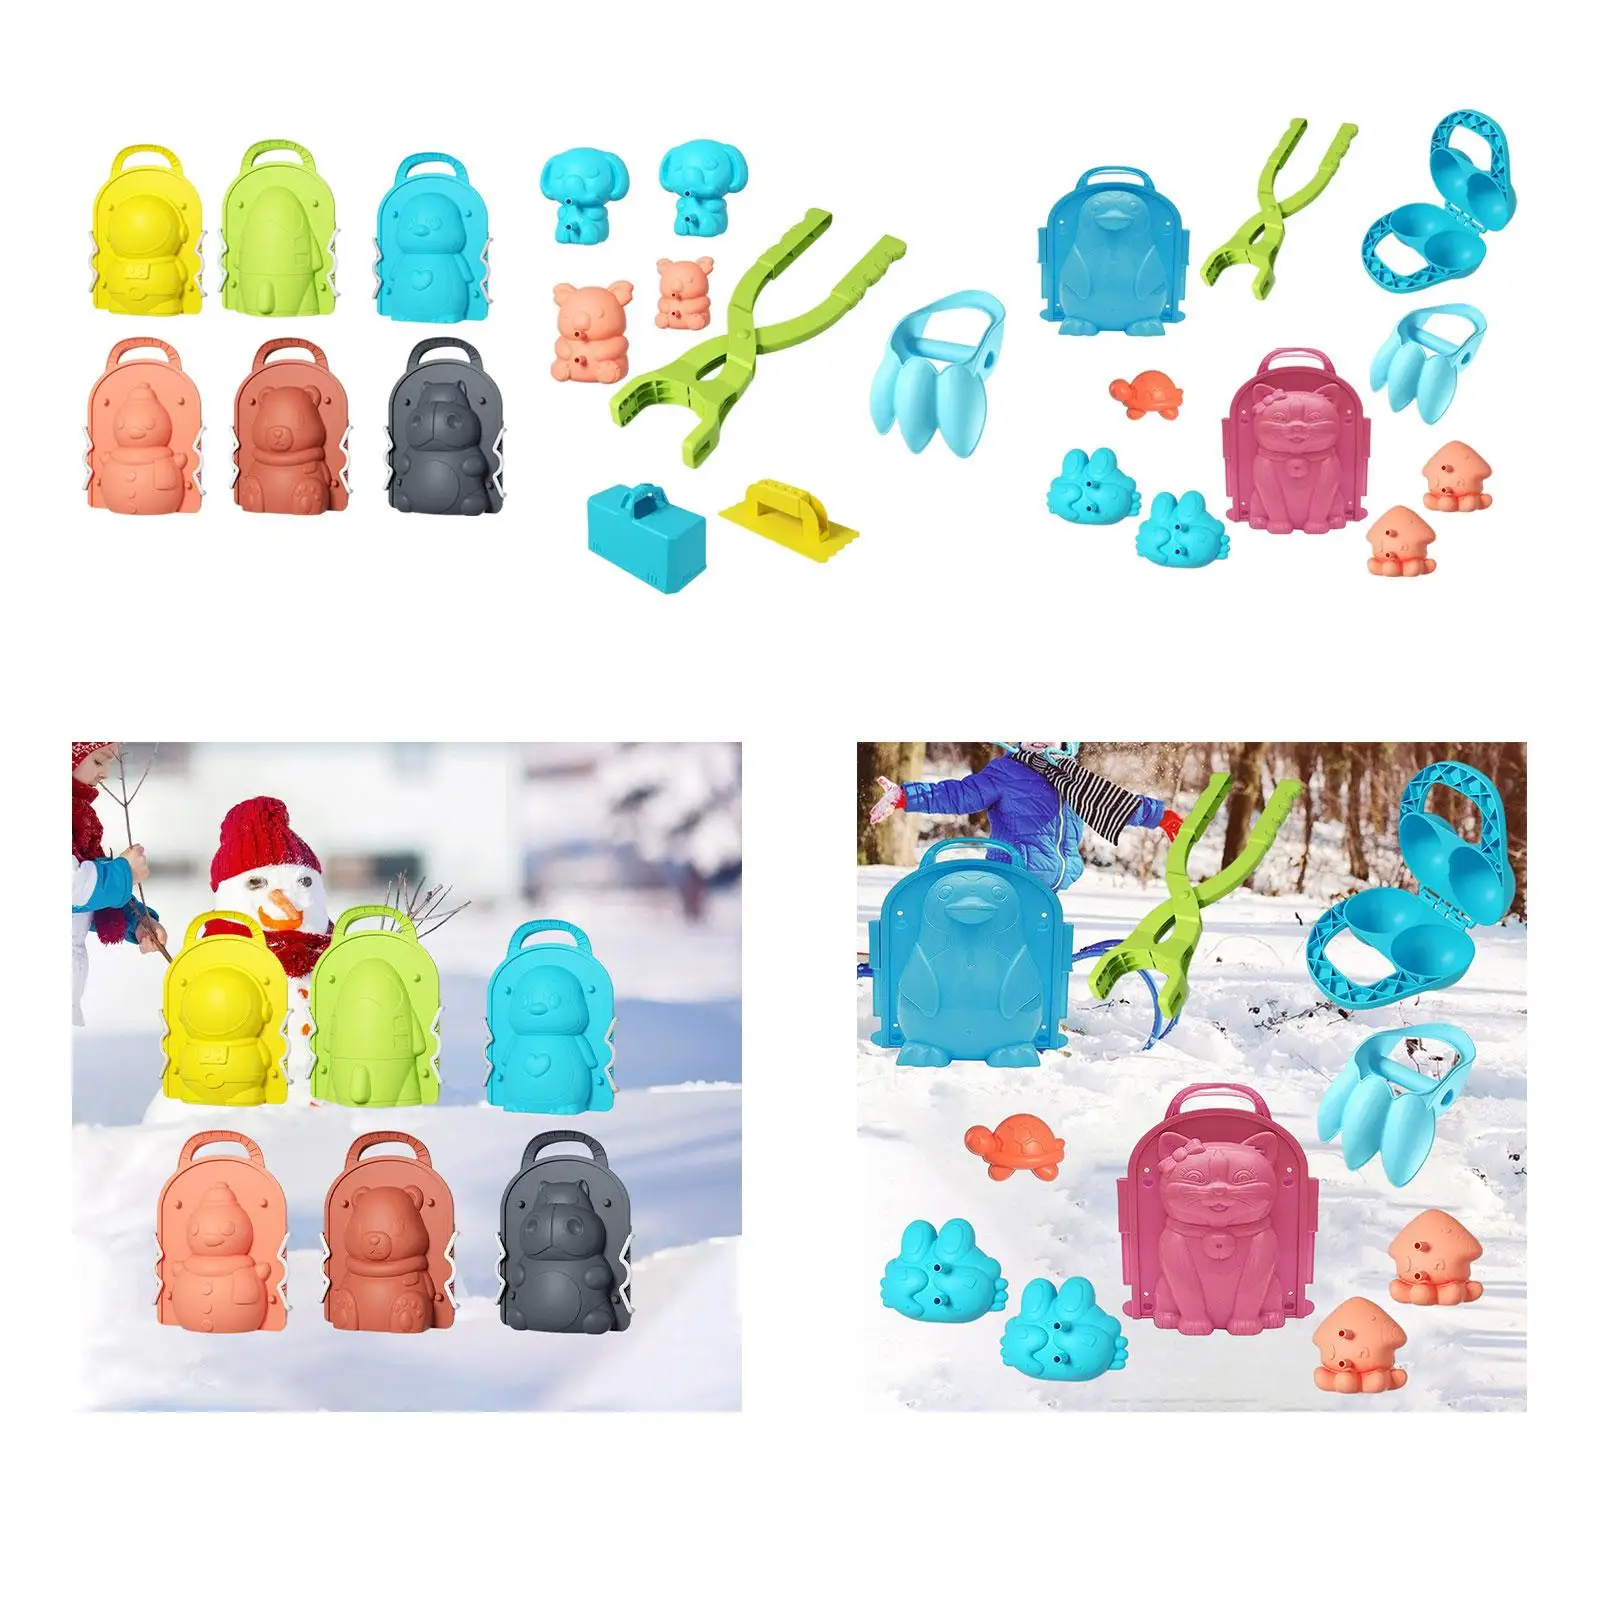 Clip Kit Sand Toy with Handle Clamps Play Sandball for Winter Outdoor Children Ball Fights Birthday Toddlers Gift